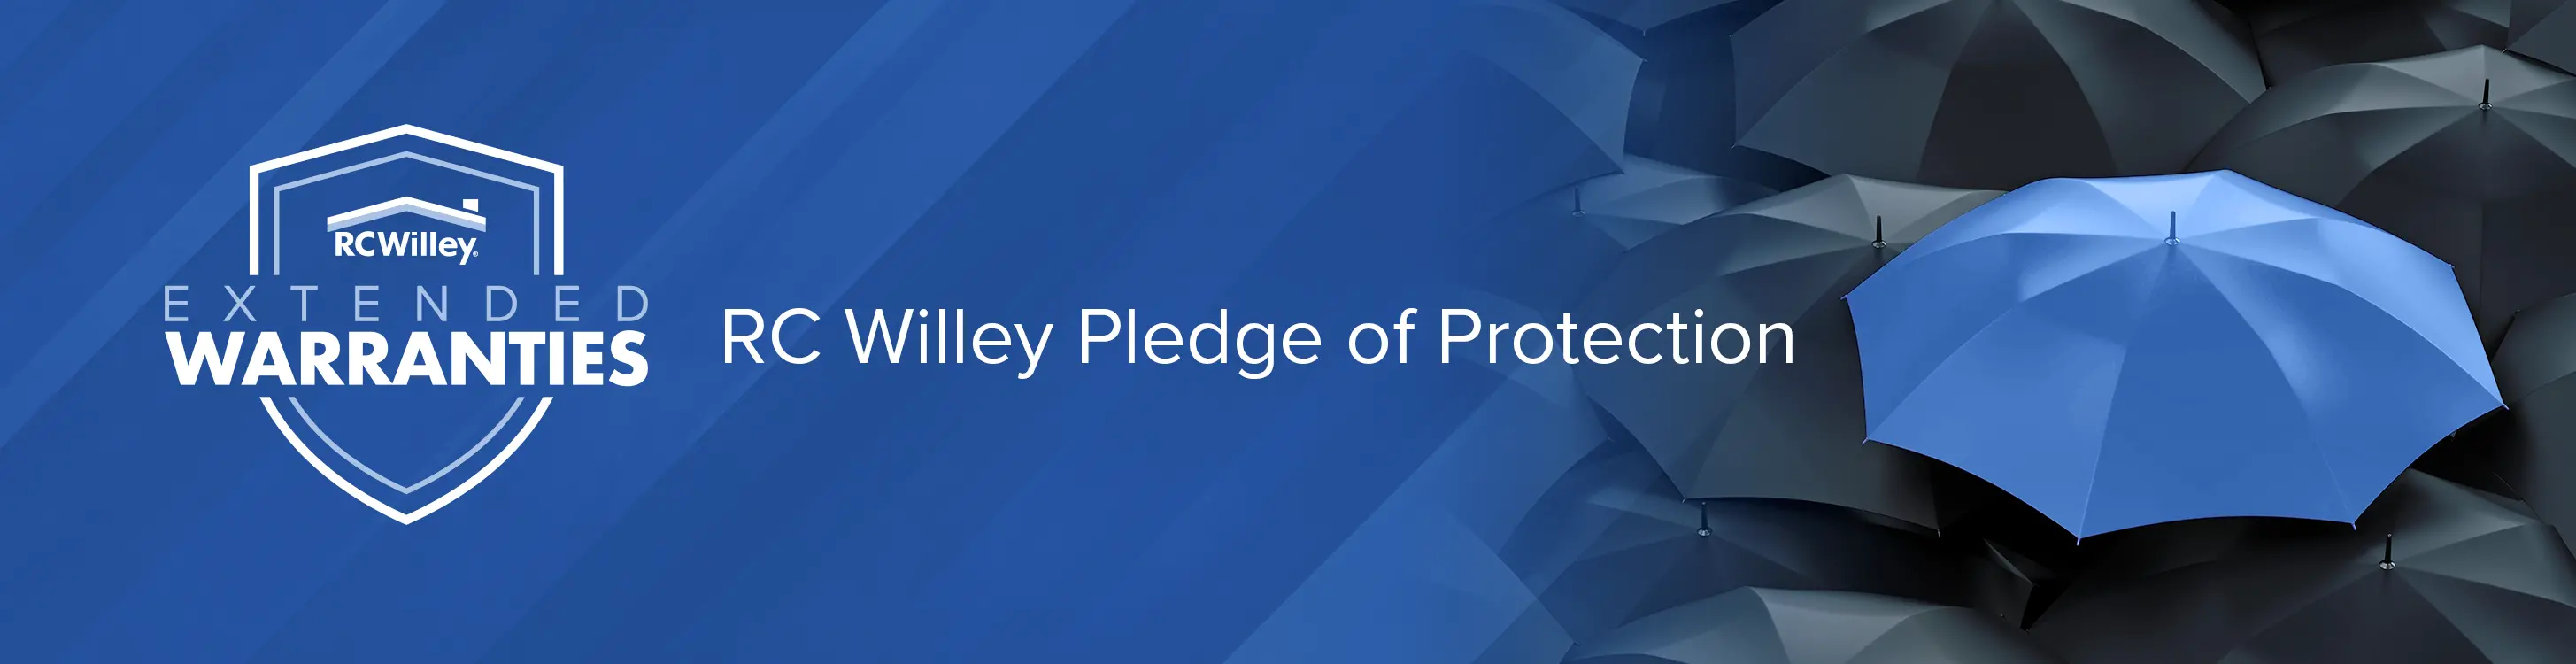 RC Willey Pledge of Protection